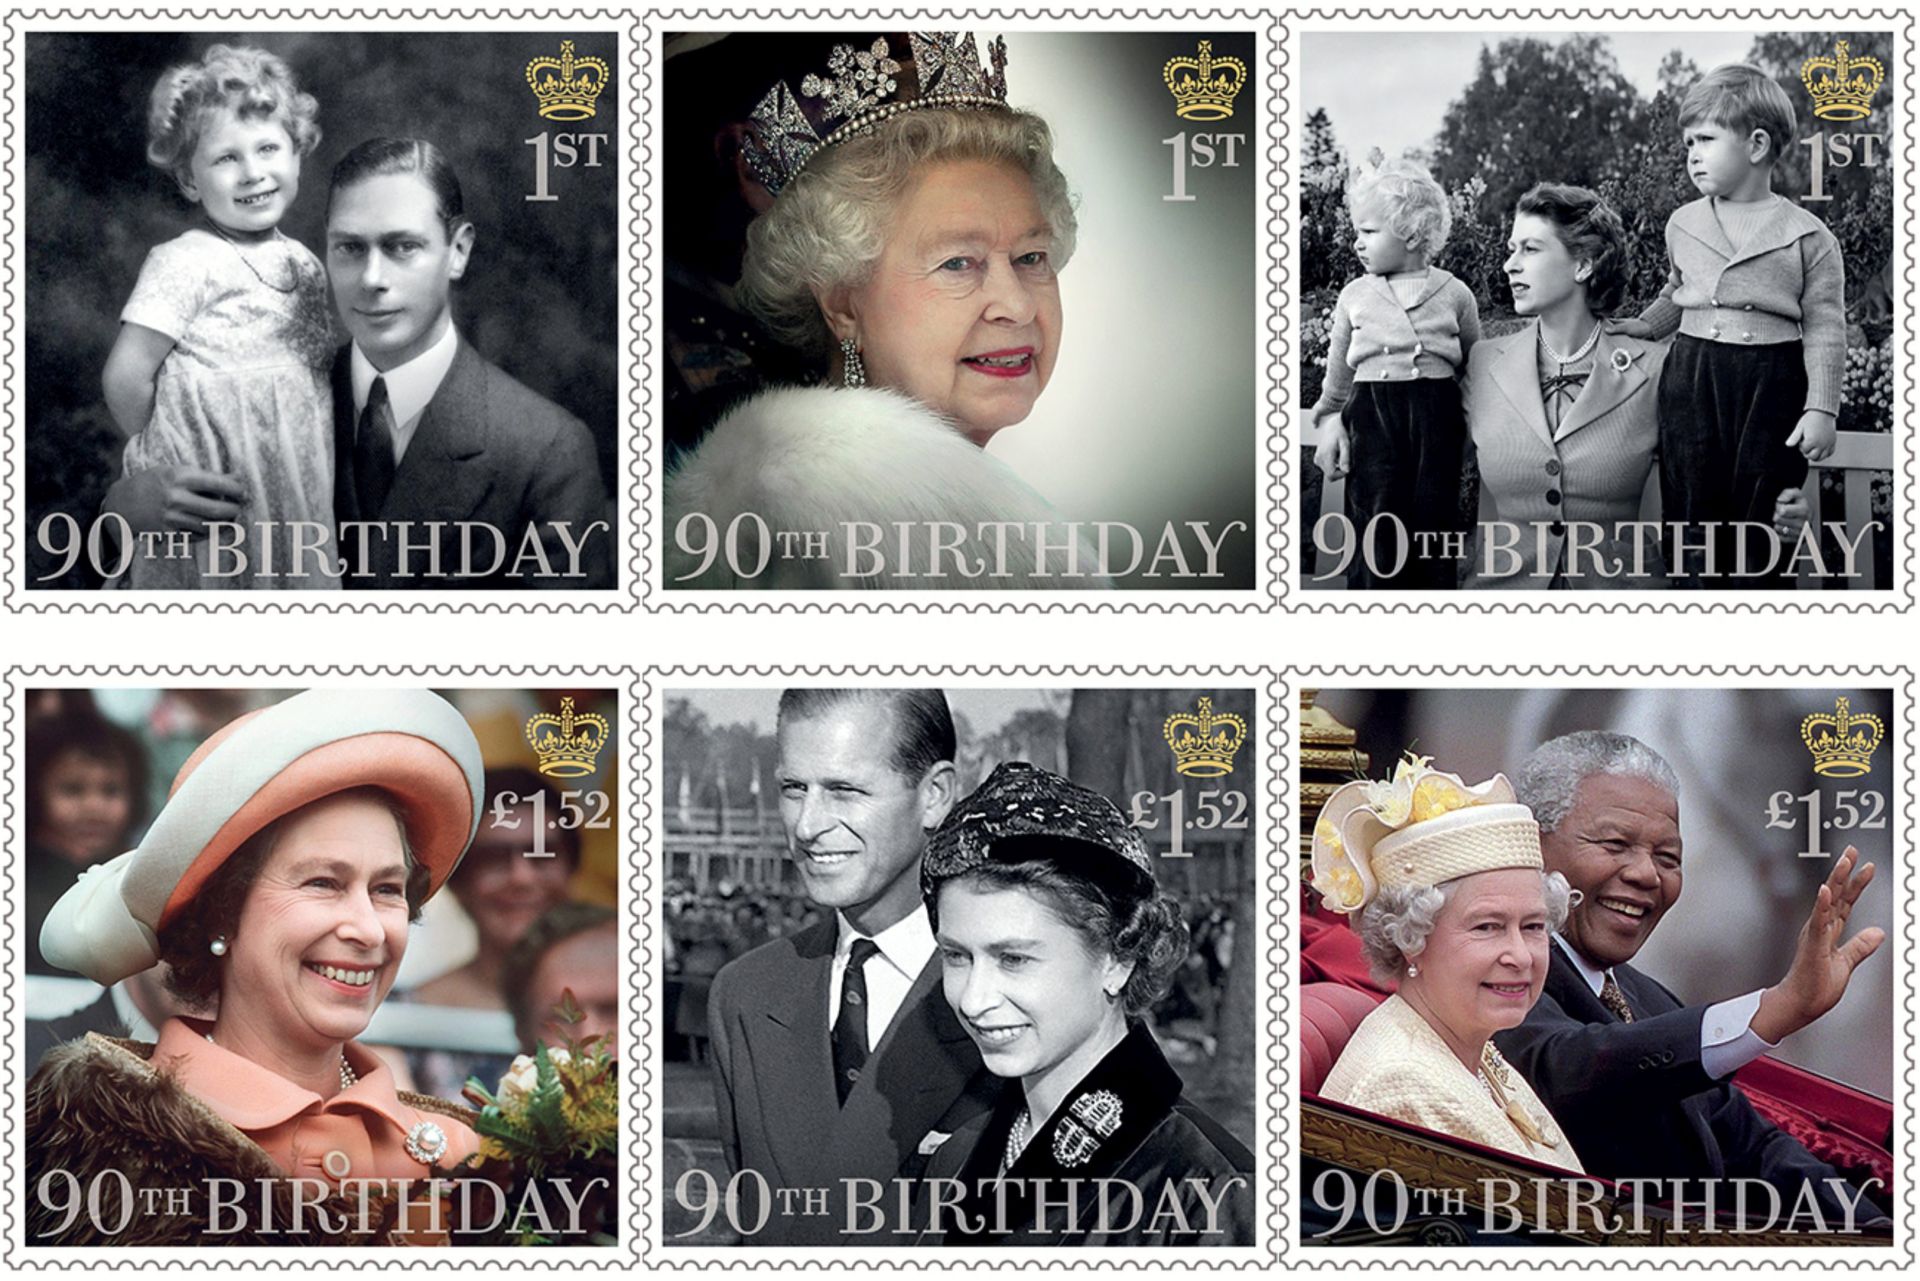 epa05268075 An undated photograph made available by the British Royal Mail, on 20 April 2016 showing six stamps issued by the Royal Mail to mark the 90th birthday of Britain's Queen Elizabeth II. The stamp set set includes images of Queen Elizabeth II: with her father; attending the State Opening of Parliament in 2012; with Princess Anne and Prince Charles in 1952; visiting New Zealand in 1977; with The Duke of Edinburgh in 1957; and with Nelson Mandela in 1996. he Queen celebrates her 90th birthday on 21 April 2016. She will open a Post Office and band stand in Windsor on 20 April 2016.  EPA/RANALD MACKECHNIE / ROYAL MAIL / HANDOUT UK AND IRELAND OUT HANDOUT EDITORIAL USE ONLY/NO SALES